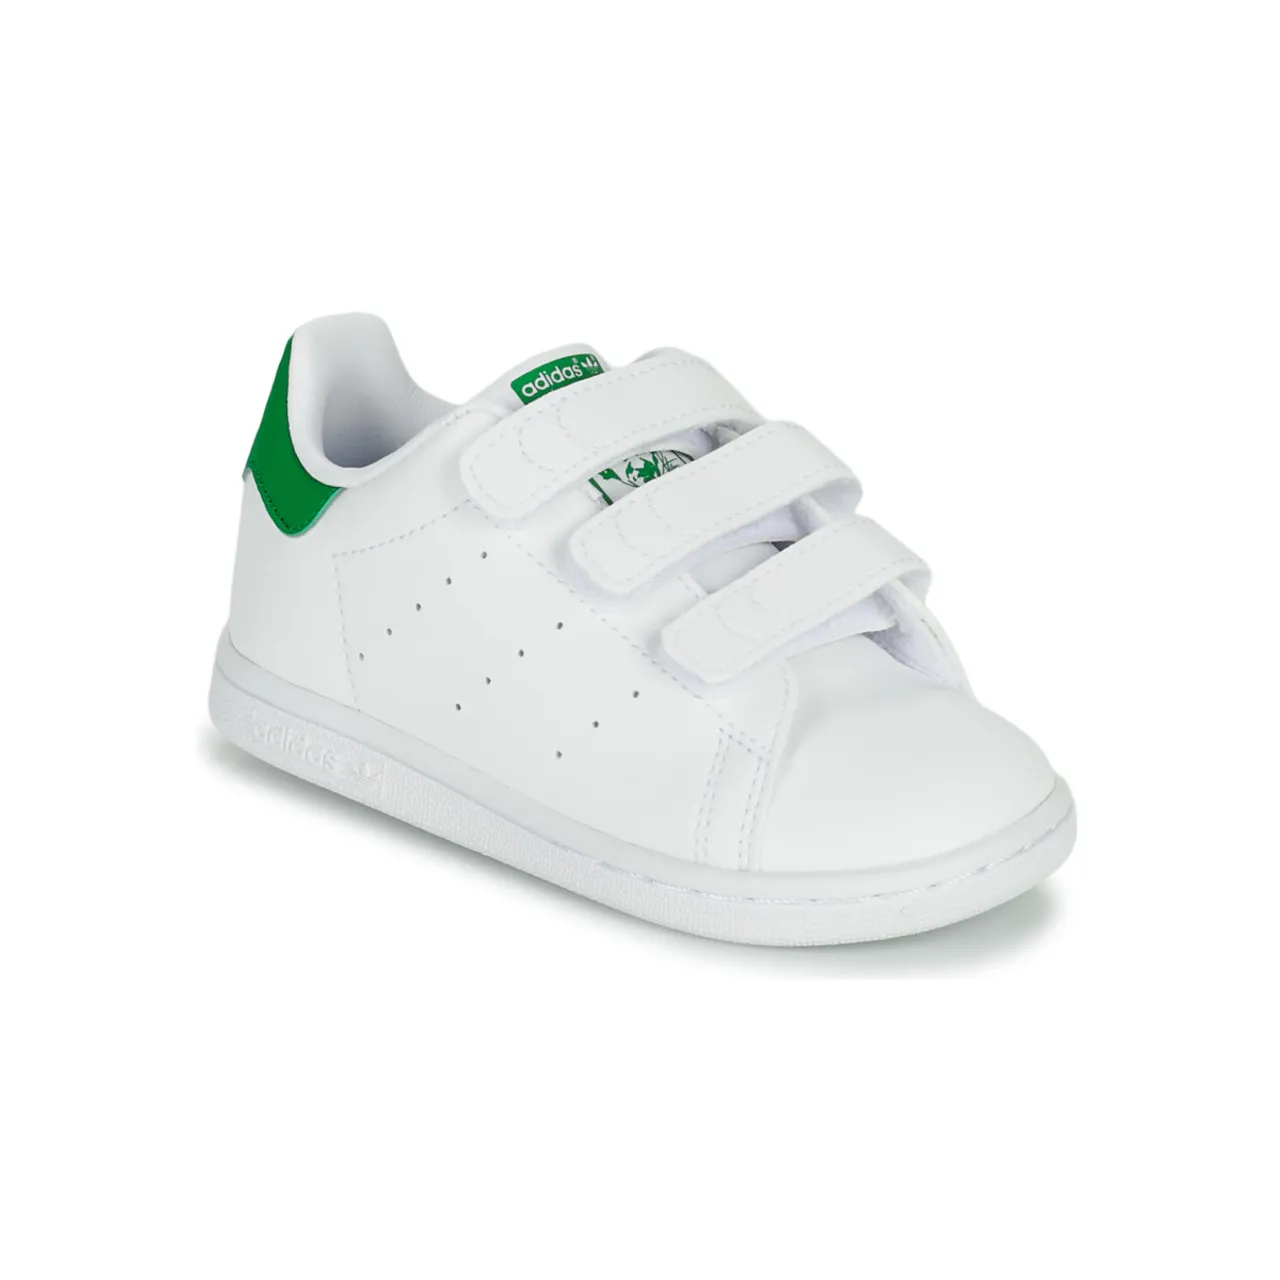 adidas  STAN SMITH CF I SUSTAINABLE  boys's Children's Shoes (Trainers) in White